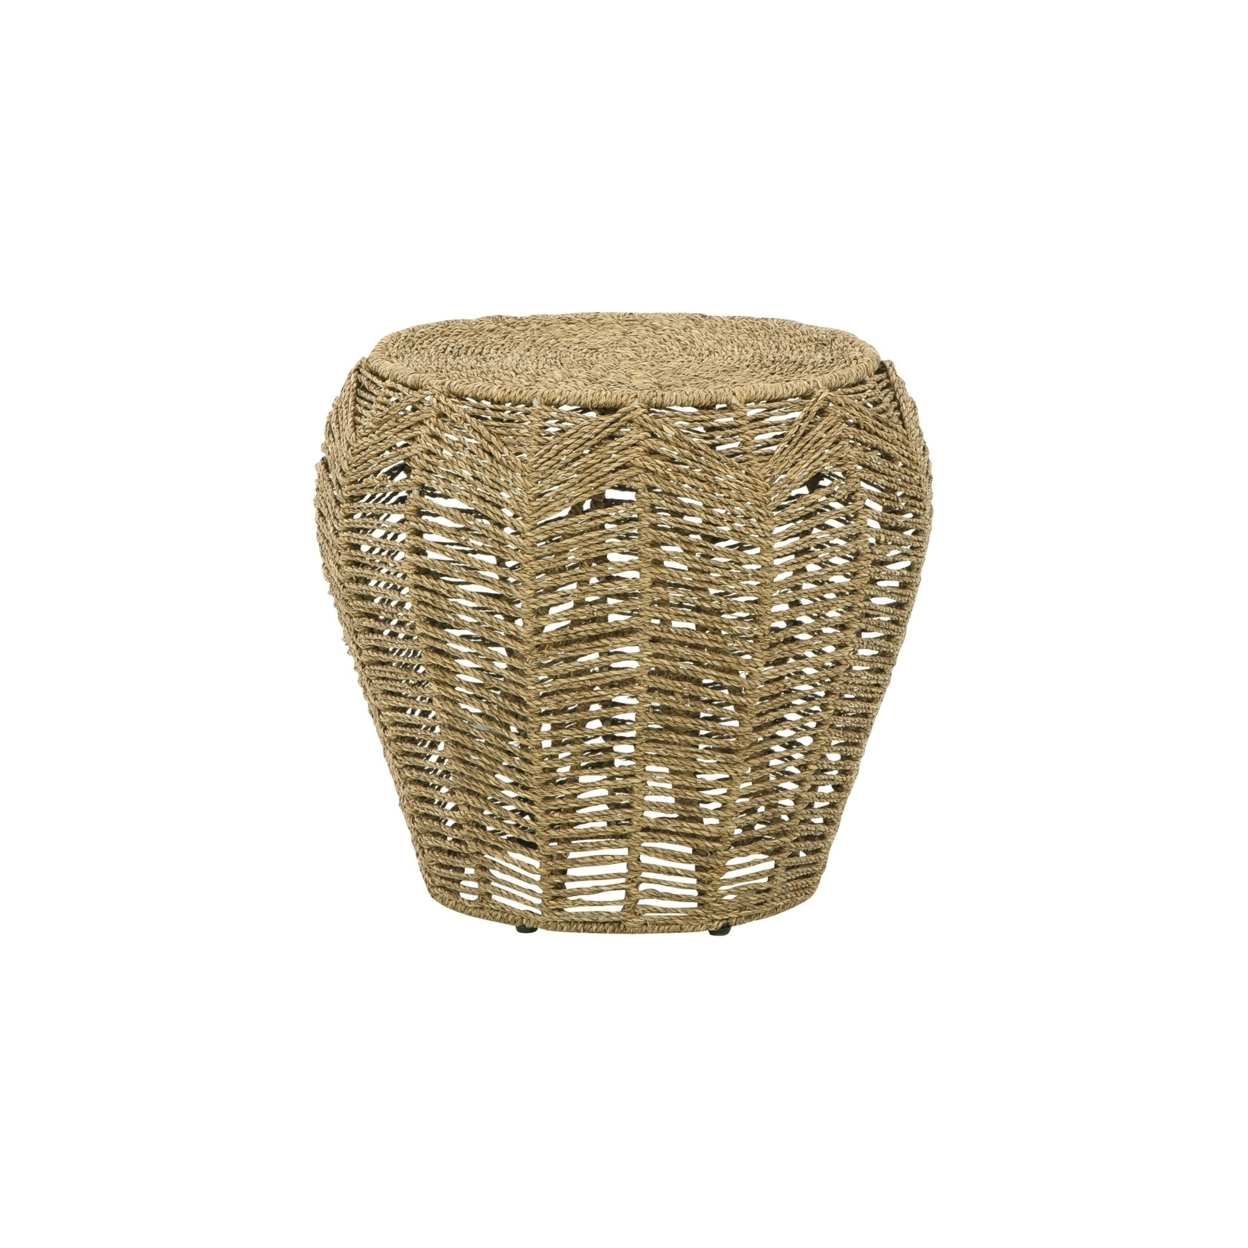 19 Inch Classic Rustic Style Side Stool, Woven Design, Wood, Natural Brown- Saltoro Sherpi